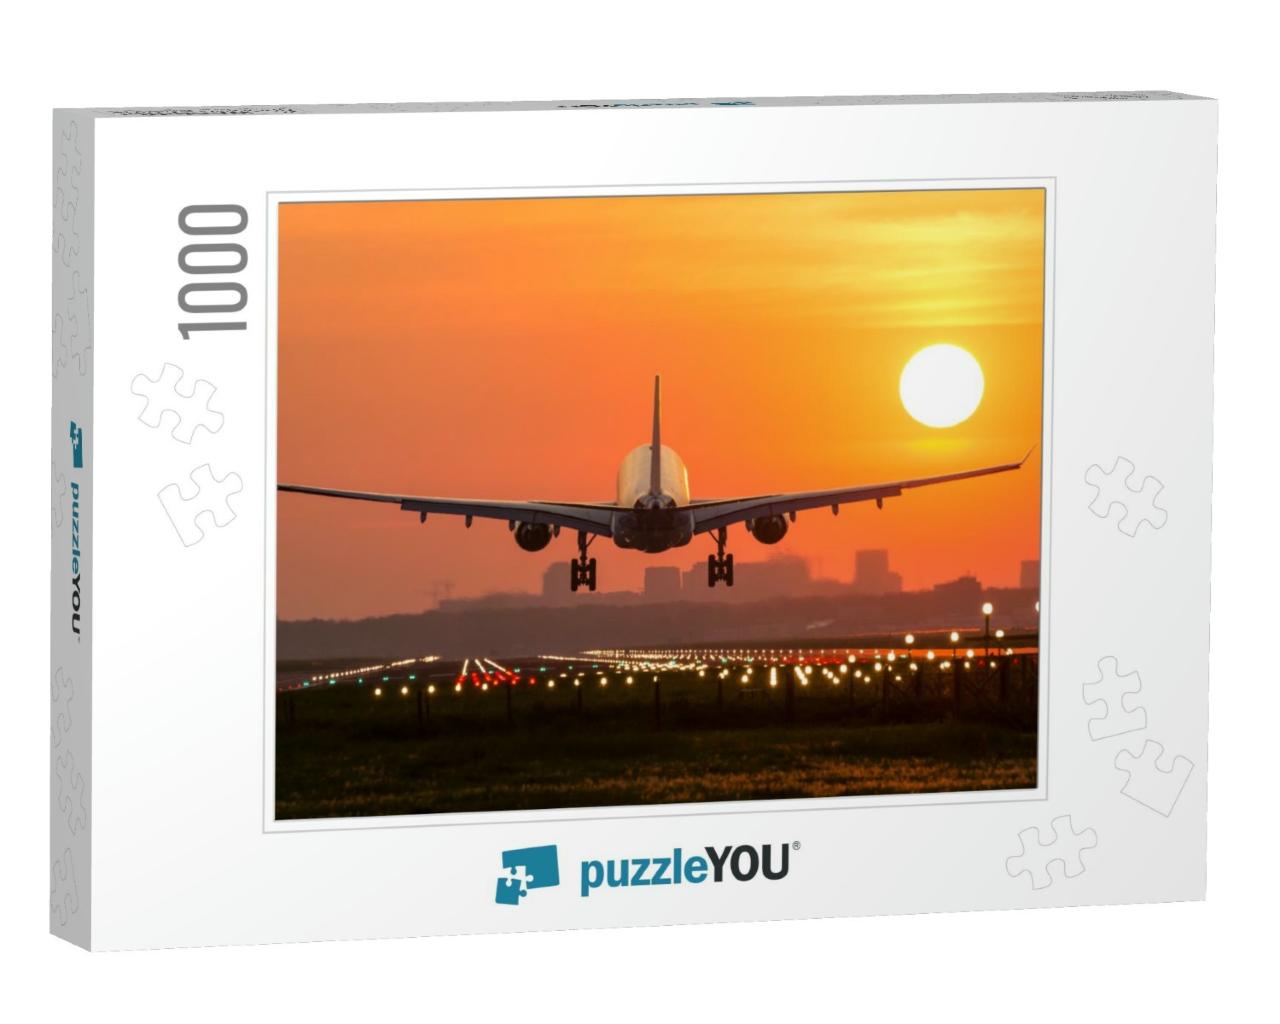 Passenger Plane is Landing During a Wonderful Sunrise... Jigsaw Puzzle with 1000 pieces